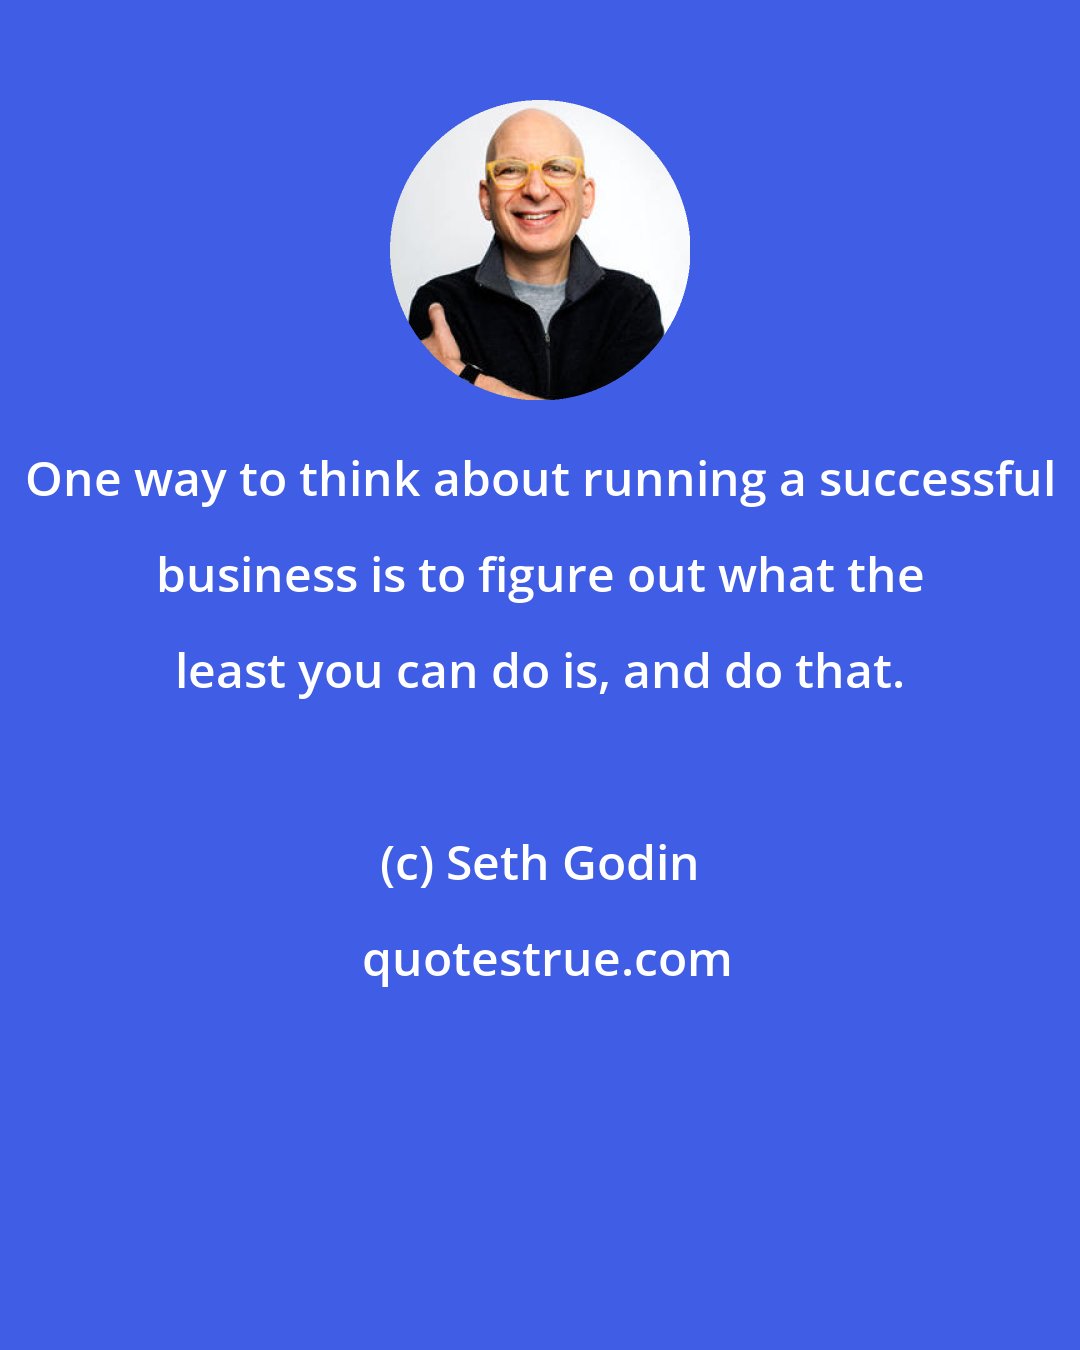 Seth Godin: One way to think about running a successful business is to figure out what the least you can do is, and do that.